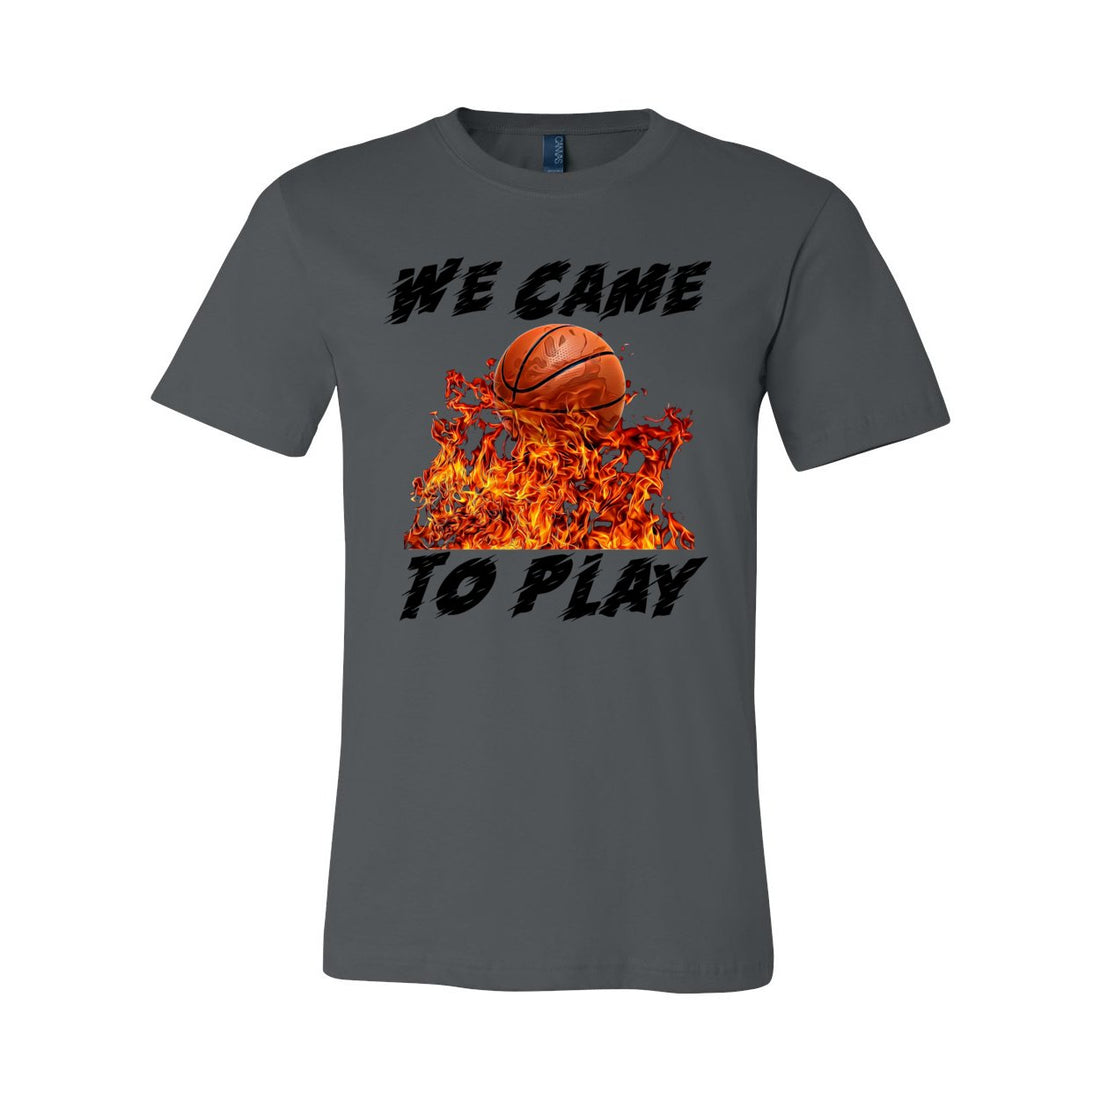 We Came To Play Short Sleeve Jersey Tee - T-Shirts - Positively Sassy - We Came To Play Short Sleeve Jersey Tee